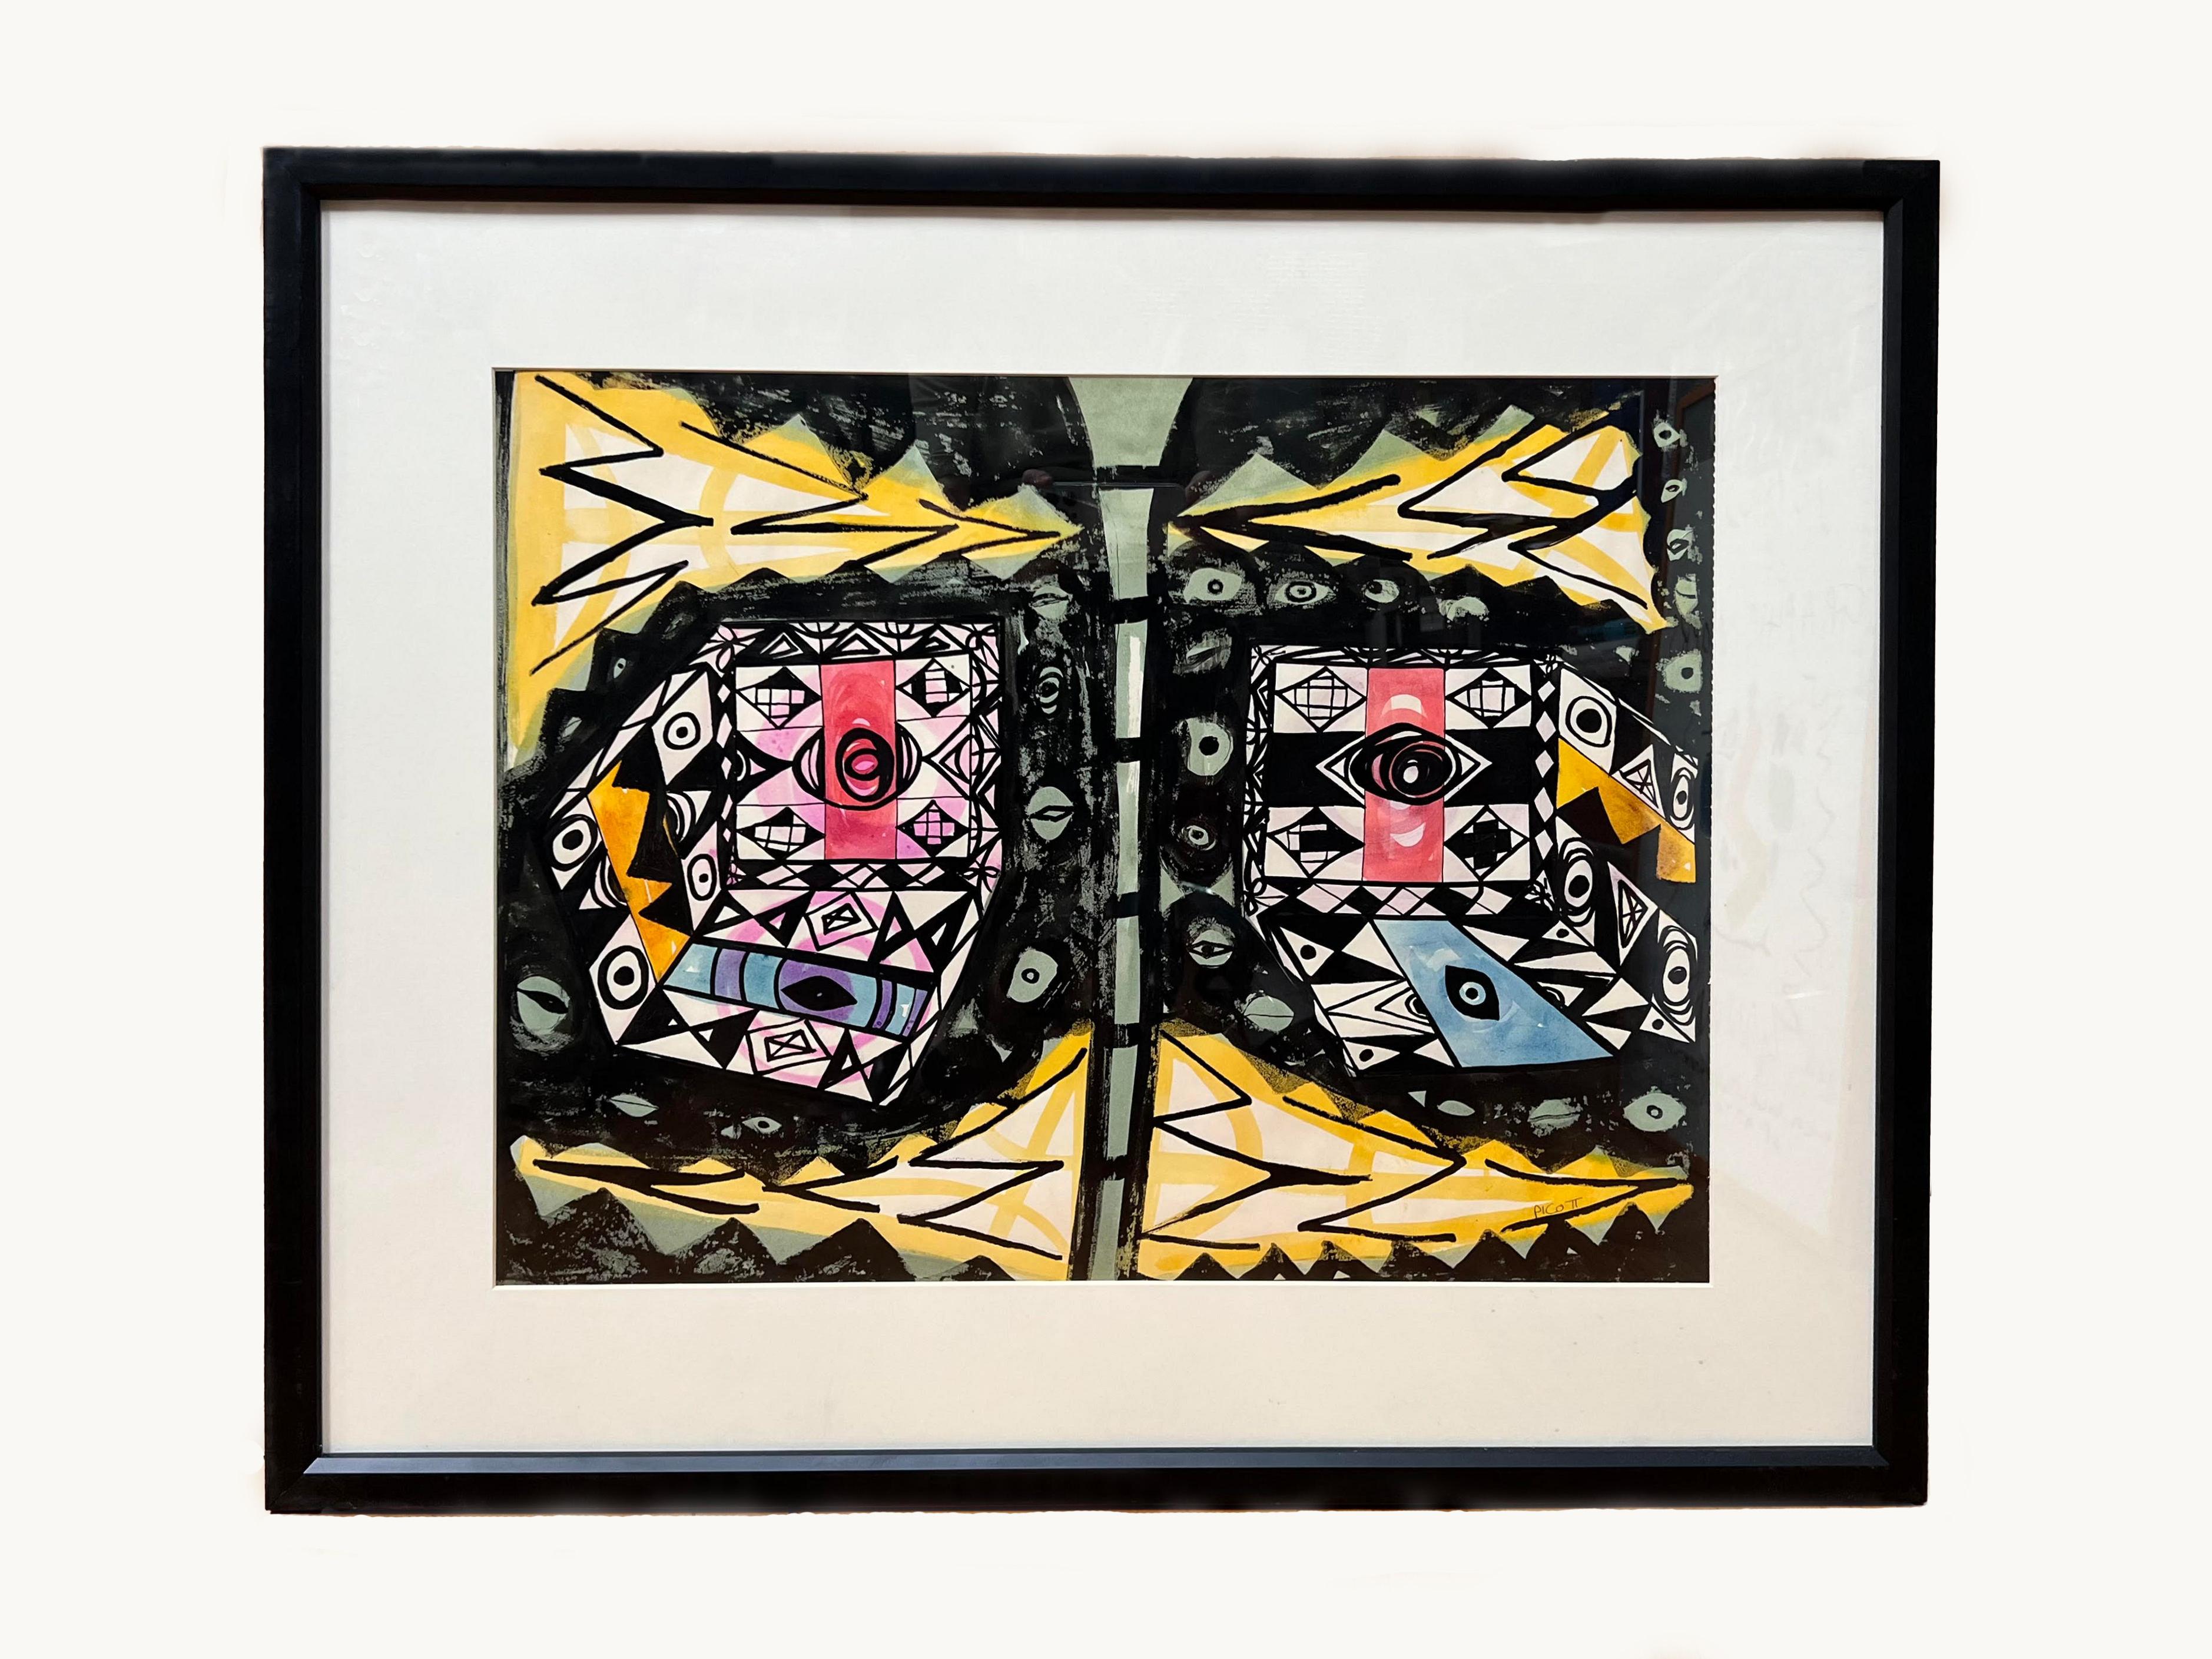 This gouache reveals a butterfly tree with wings covered in multiple eyes towards the observer. In this primitive kaleidoscope playing with perspectives, the artist Rupert Picott leads us into a dance of forms, half-animal, half-vegetal. Here, we